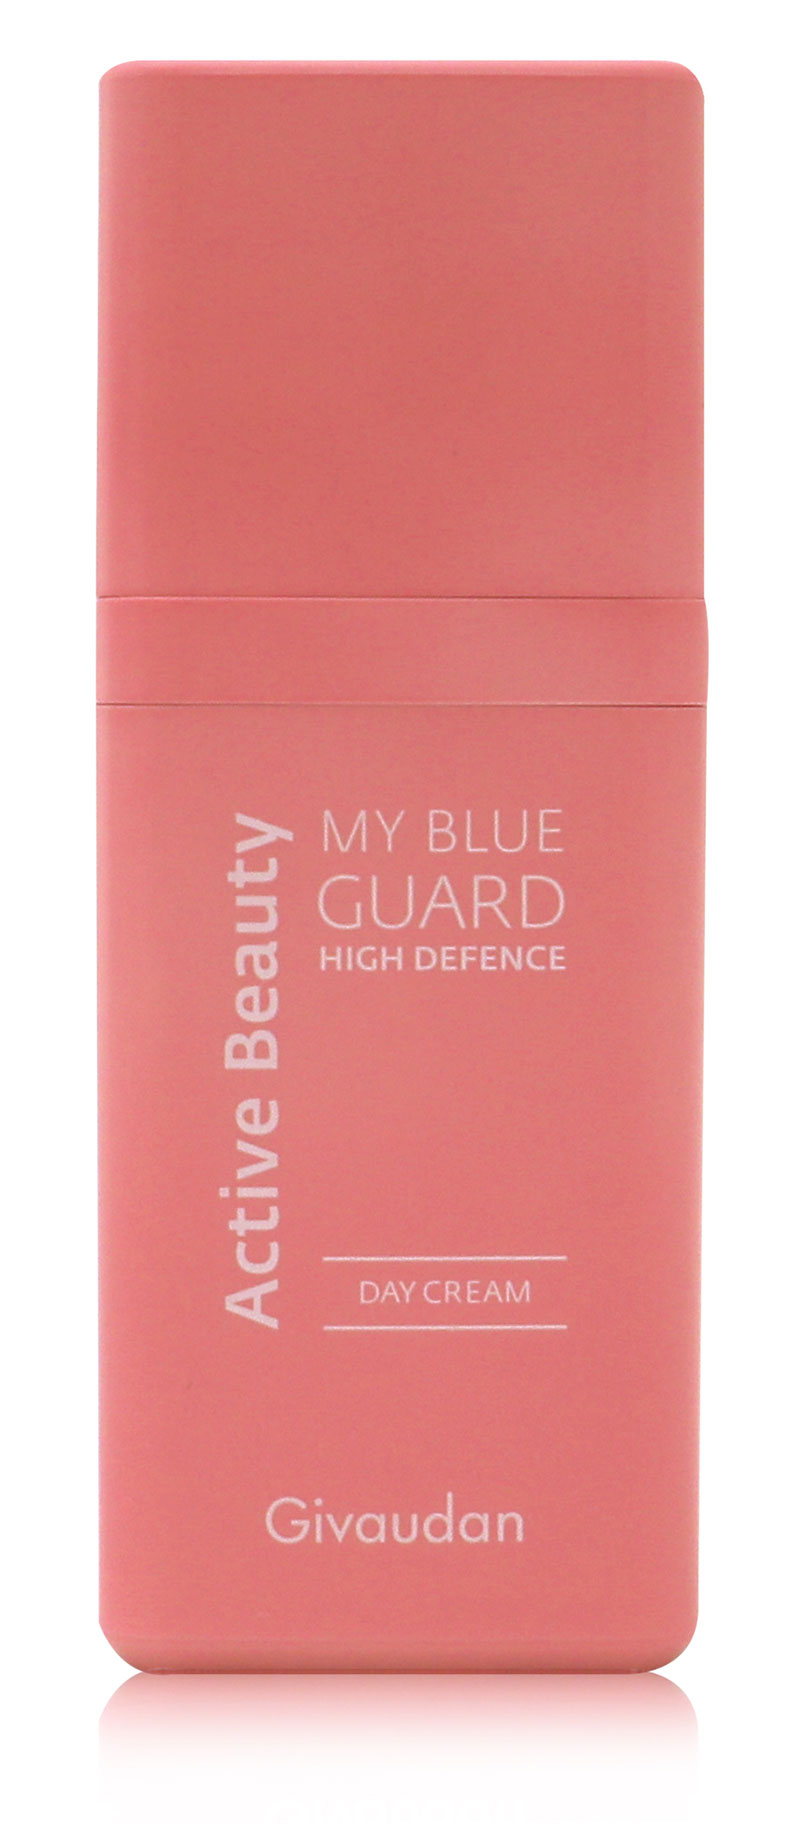 Givaudan Active Beauty reshapes the face of beauty for Generation Z with My Blue Guard High Defence